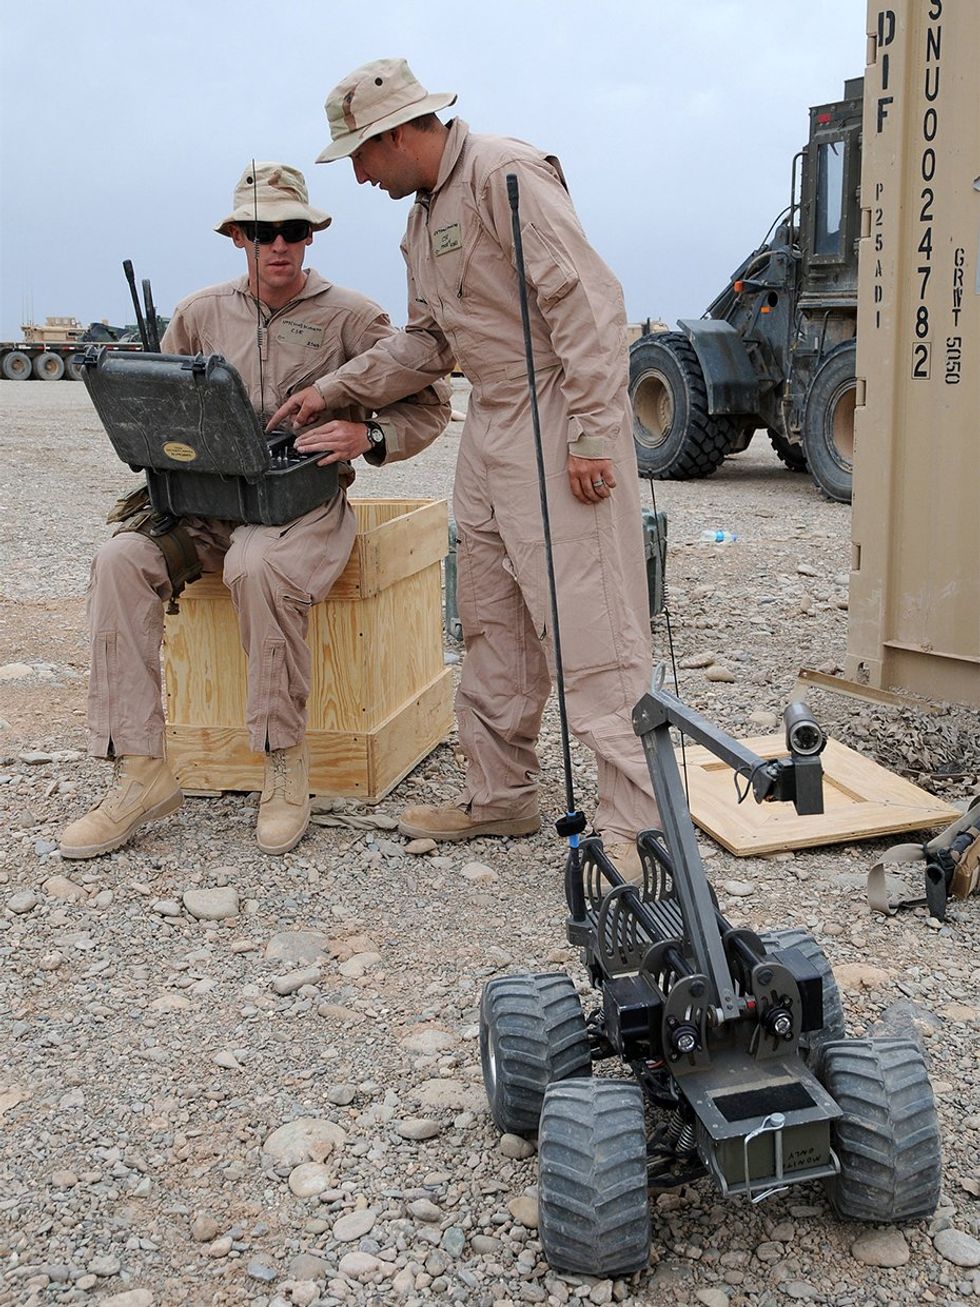 Two men work with a rugged box containing the controller for the small four-wheeled vehicle in front of them. The vehicle has a video camera mounted on a jointed arm.